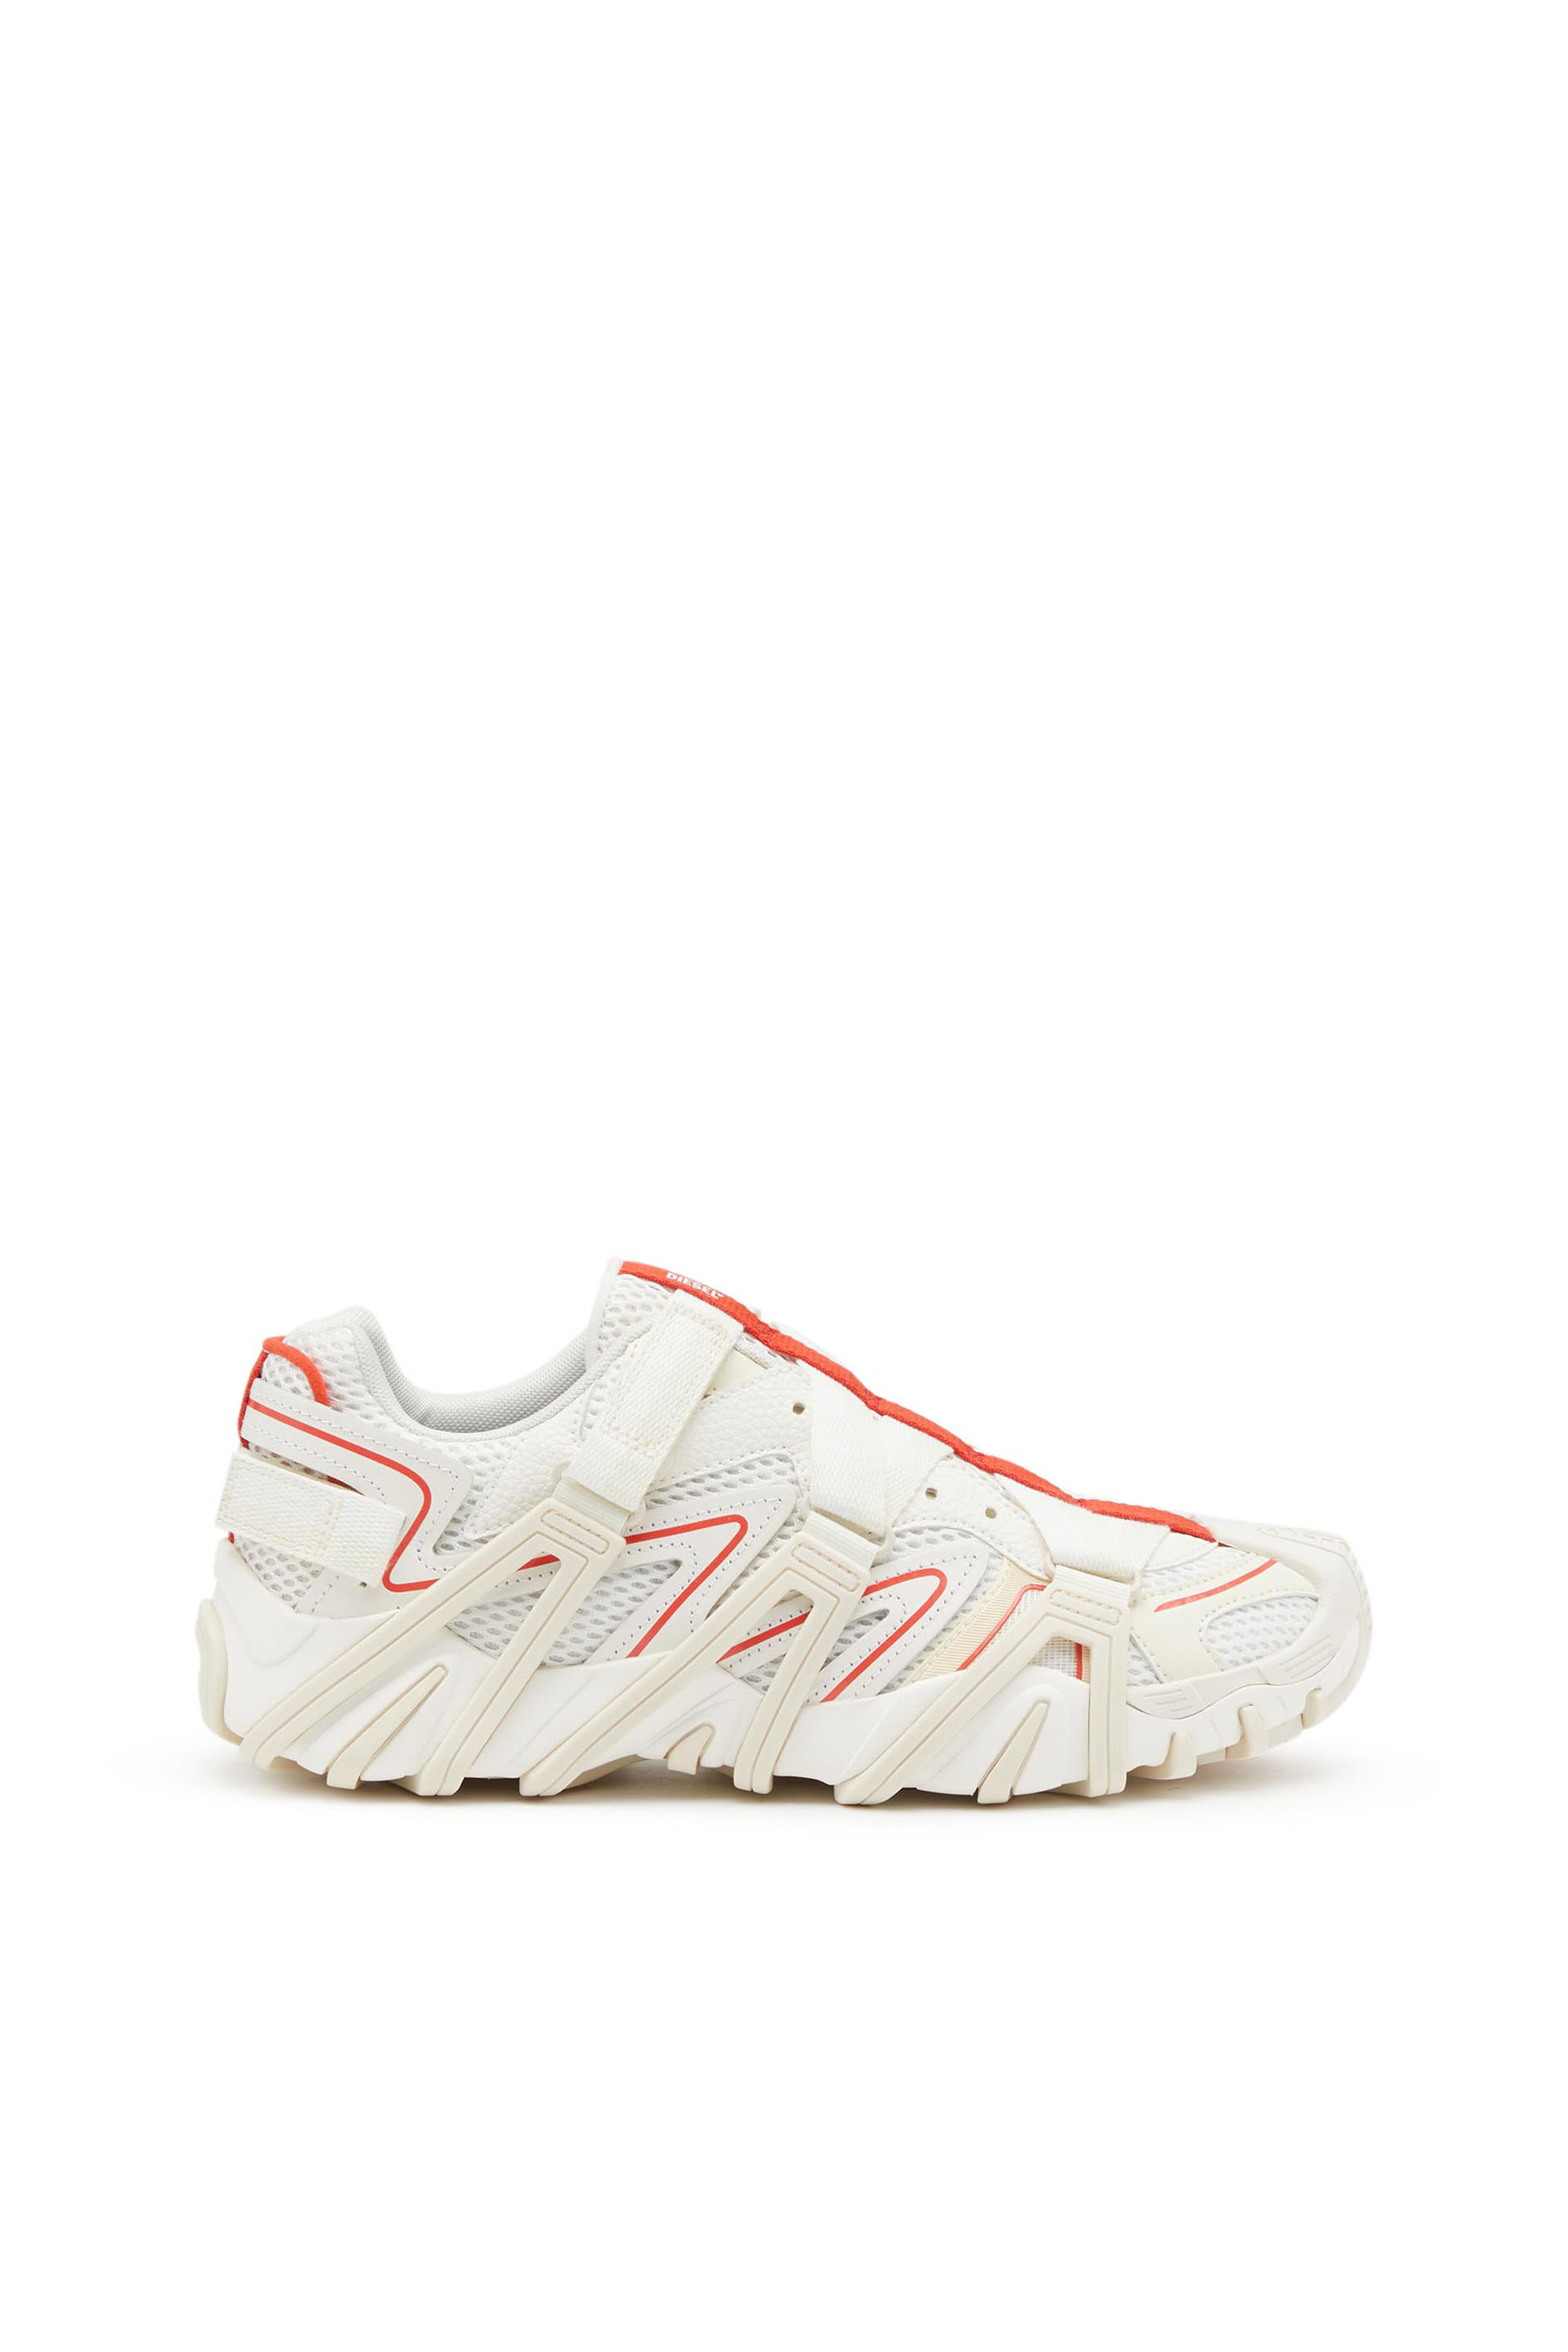 Diesel Caged Sneakers In Mesh And Leather In Multicolor